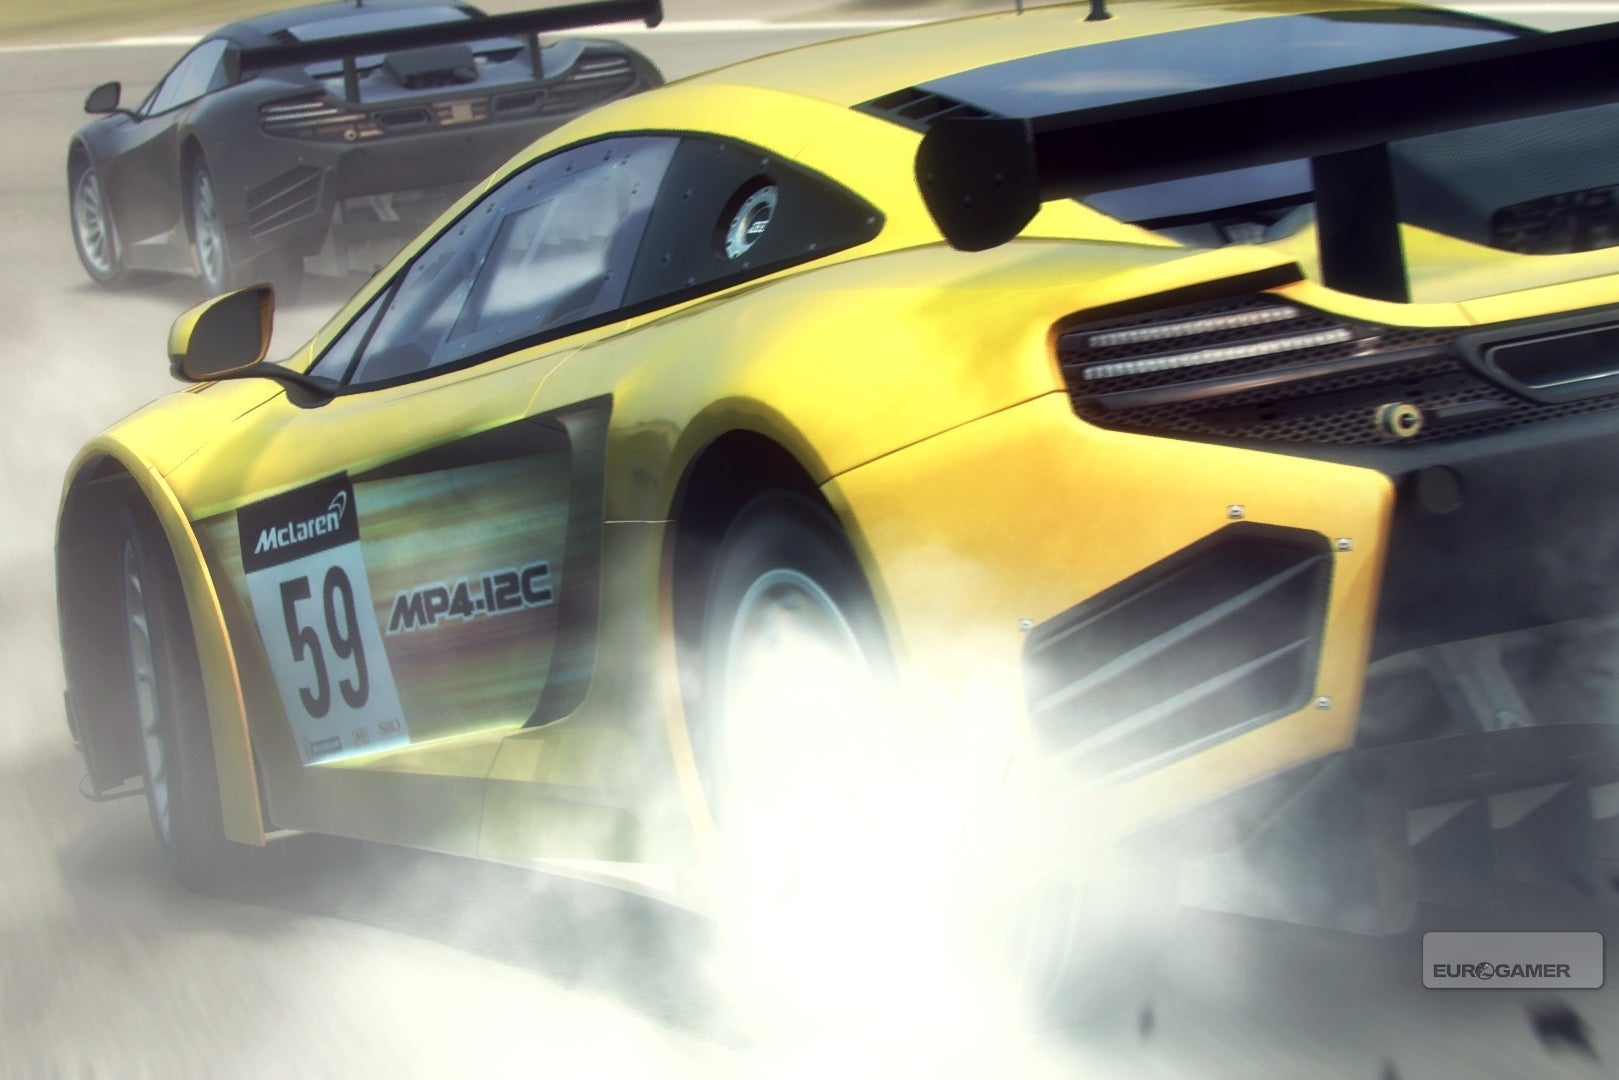 Image for Codemasters' games to be distributed by Namco Bandai in Europe from now on